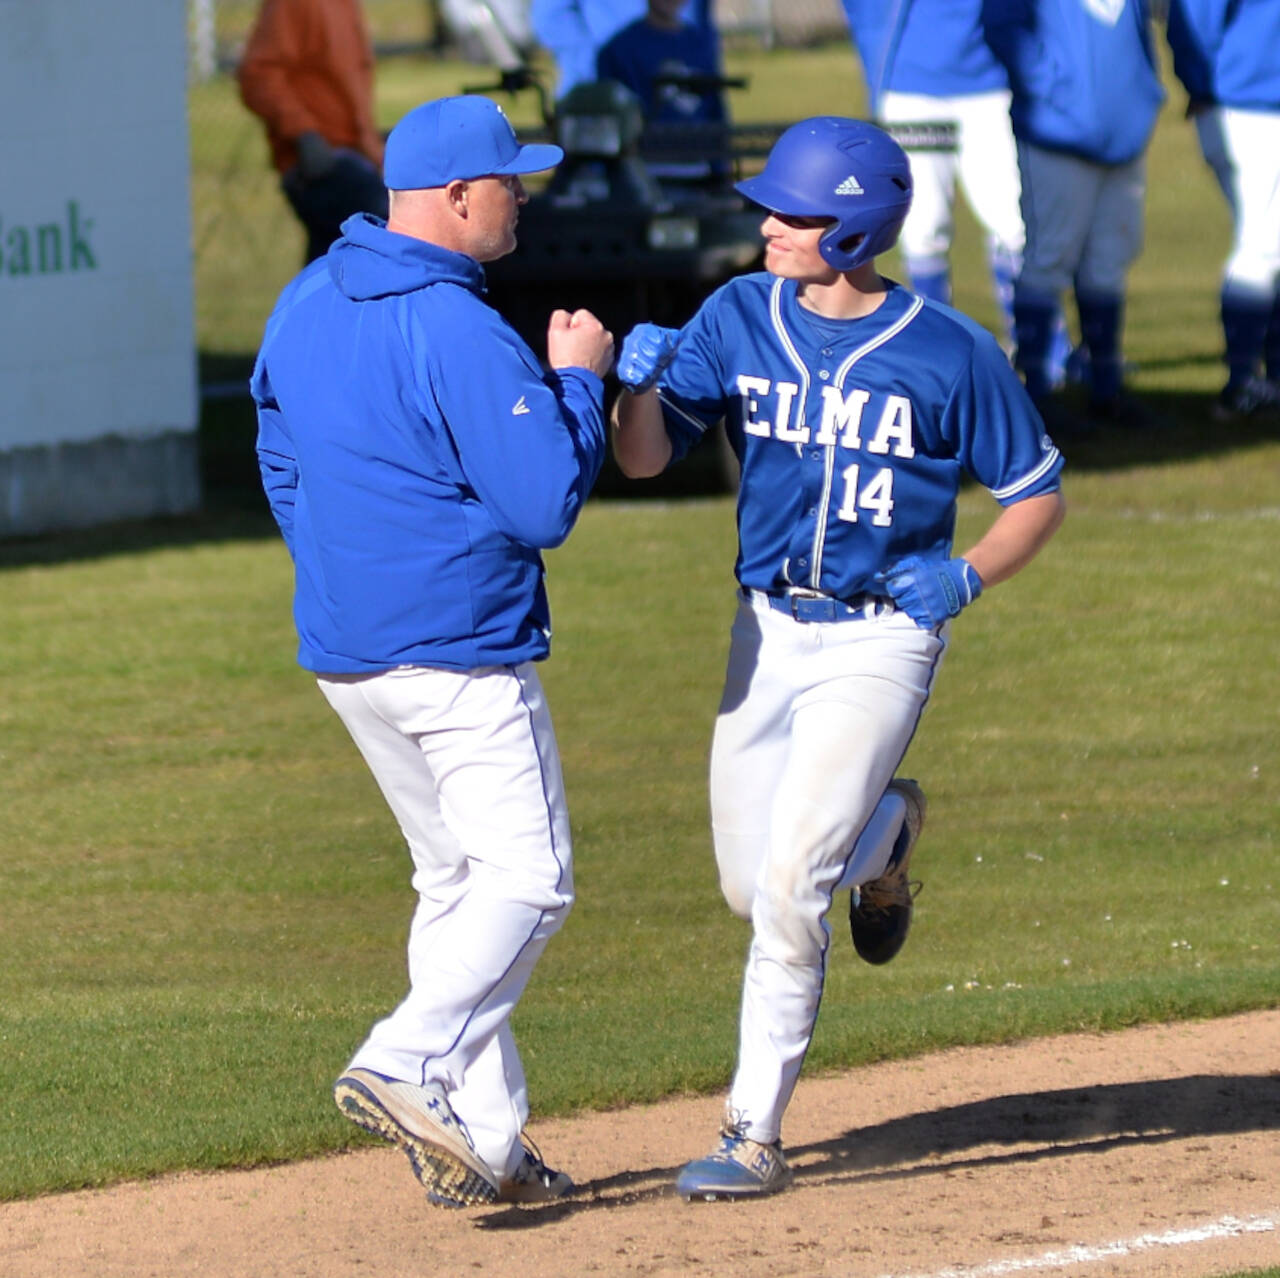 RYAN SPARKS | THE DAILY WORLD Elma’s Jerred Bailey (14) gets a fist bump from head coach Travis Vessey after belting a two-run home run in the seventh inning of the Eagles’ 10-3 1A District 4 semifinal win over Tenino on Tuesday in Hoquiam.